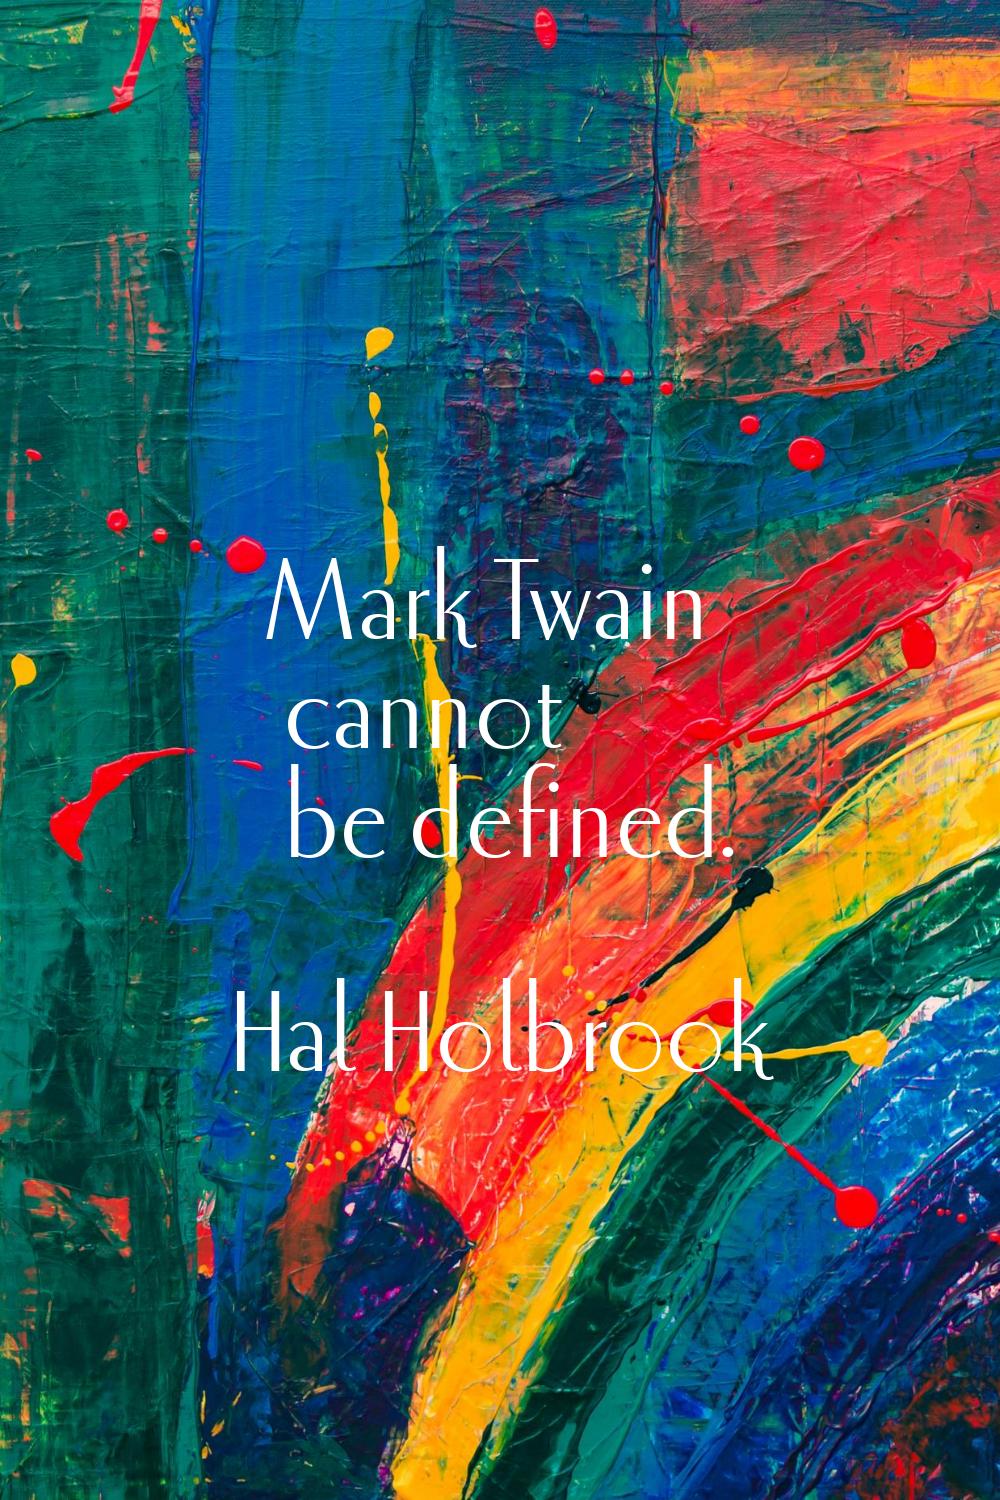 Mark Twain cannot be defined.